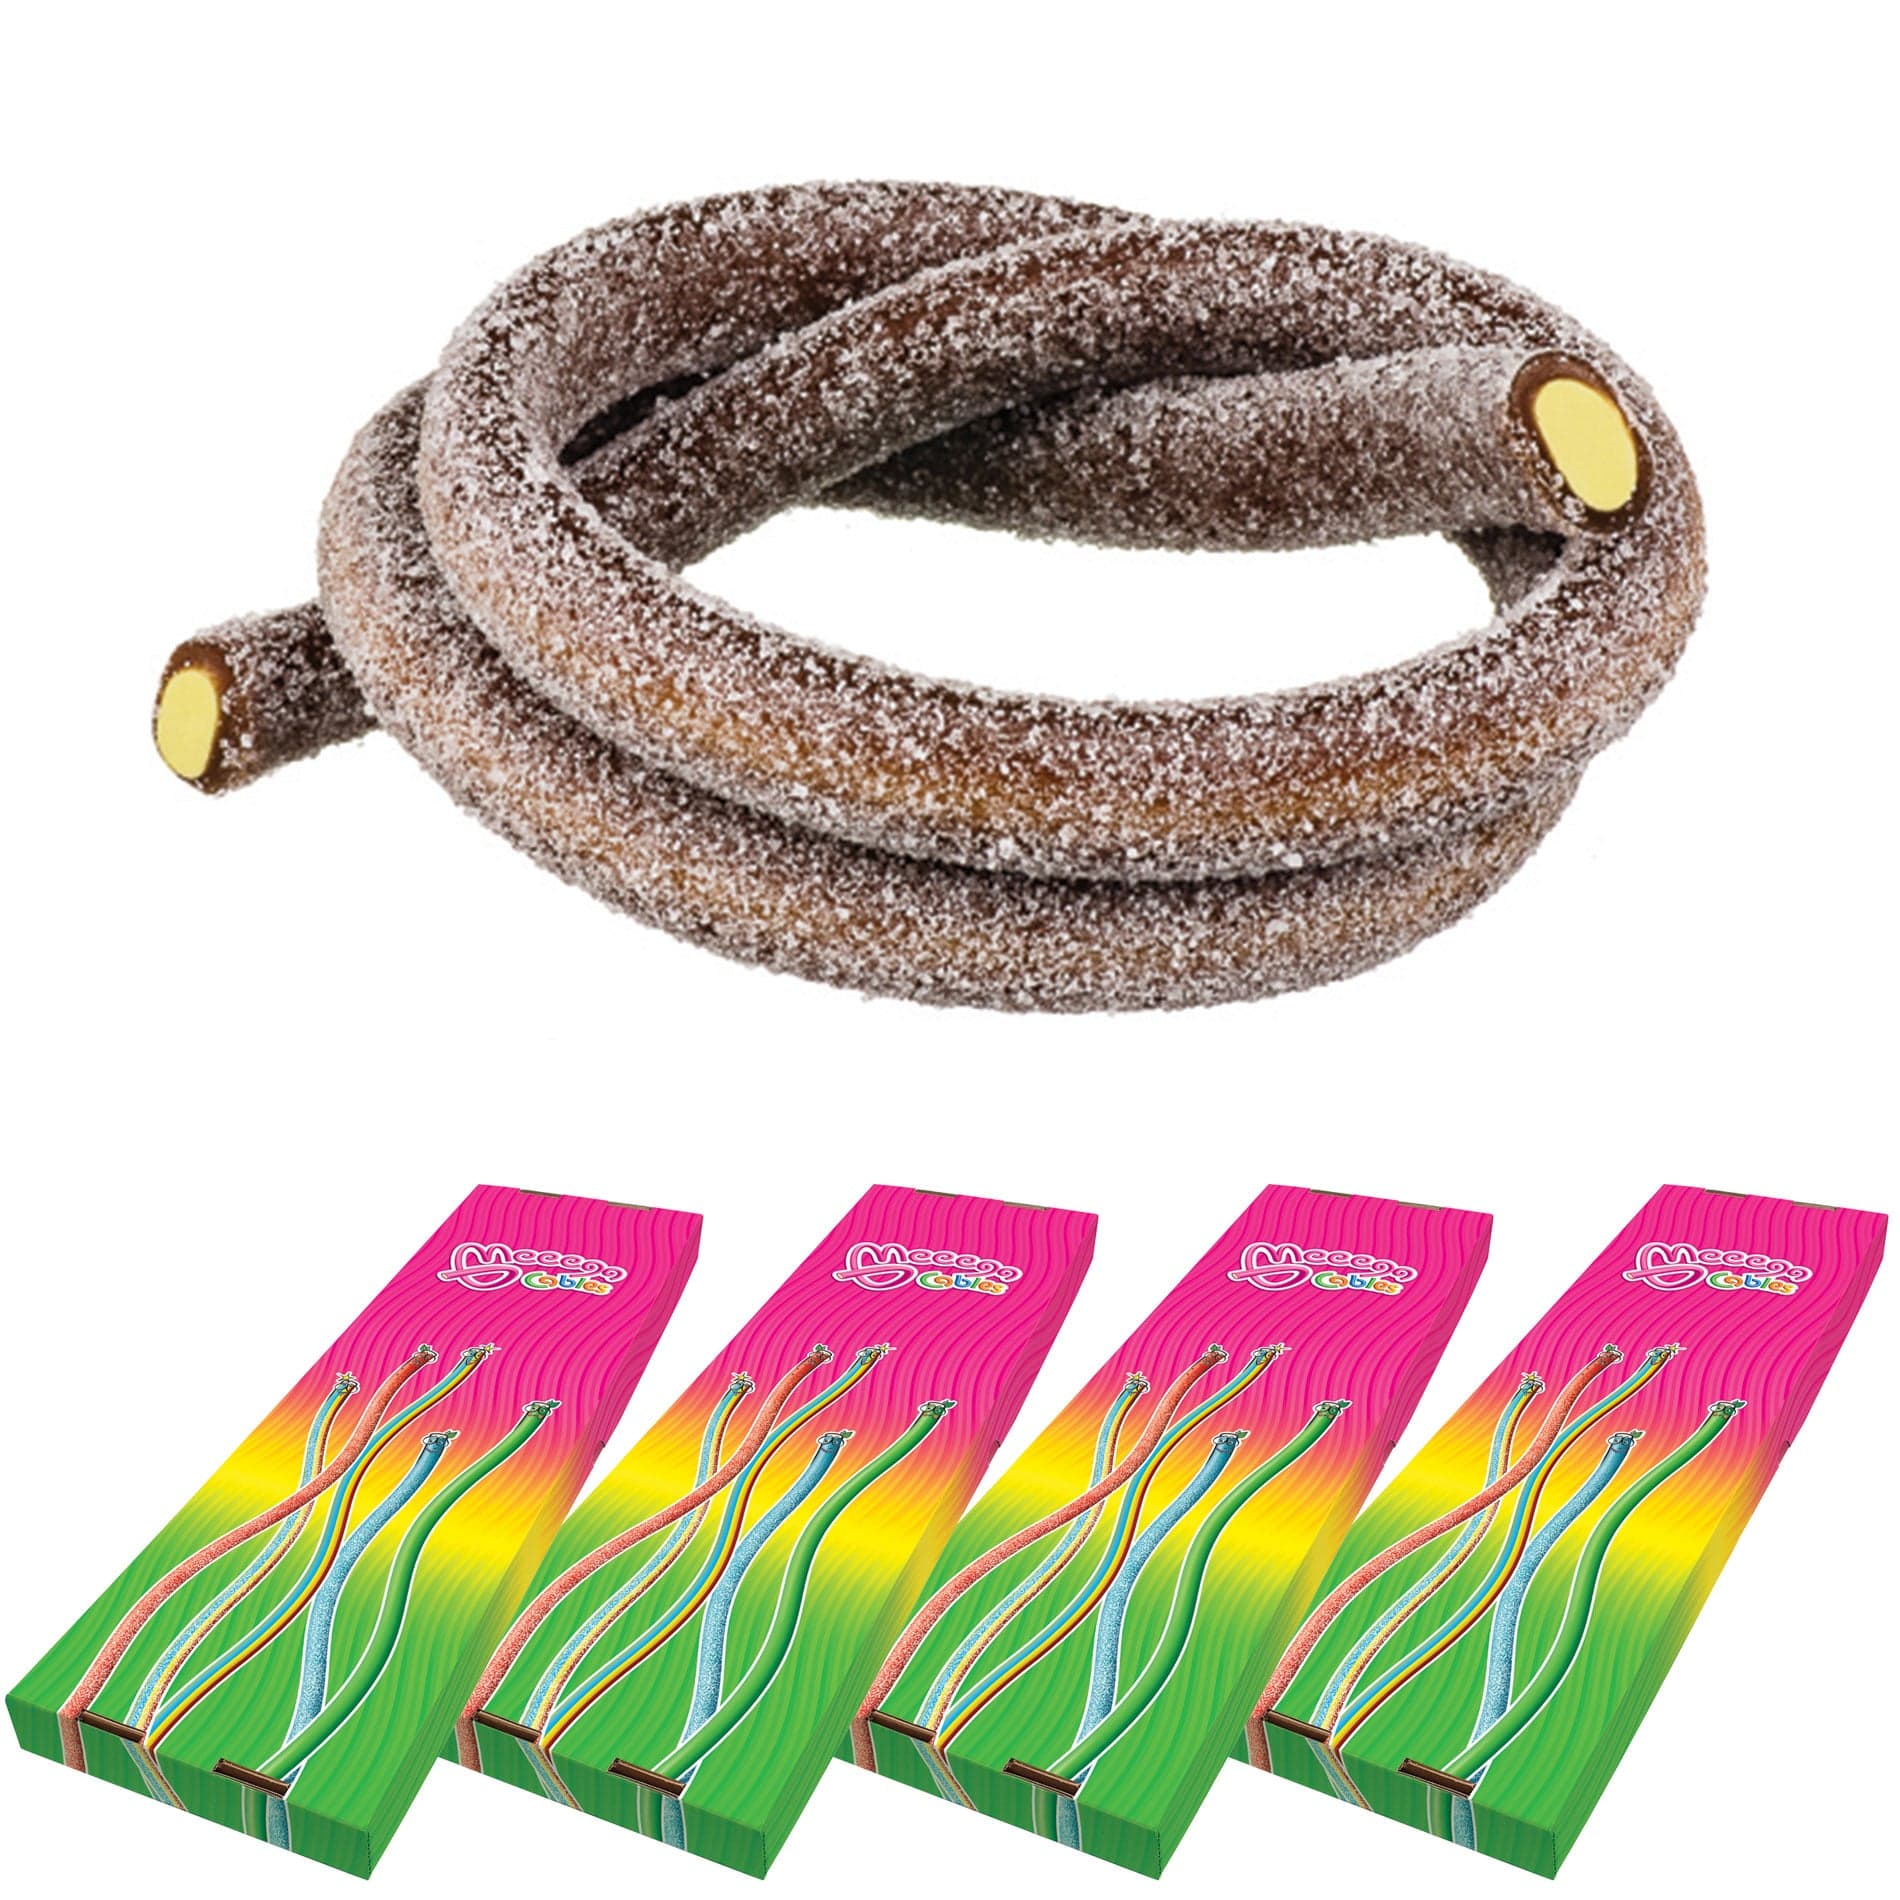 Novelty Concessions Gummy Rope SOUR COLA / 4 Pack (120 pieces) Meeega Cables European Chewy Rope Candy - Box of 30 individually wrapped Meeega Cables, each over 2-feet long cups with lids and straws